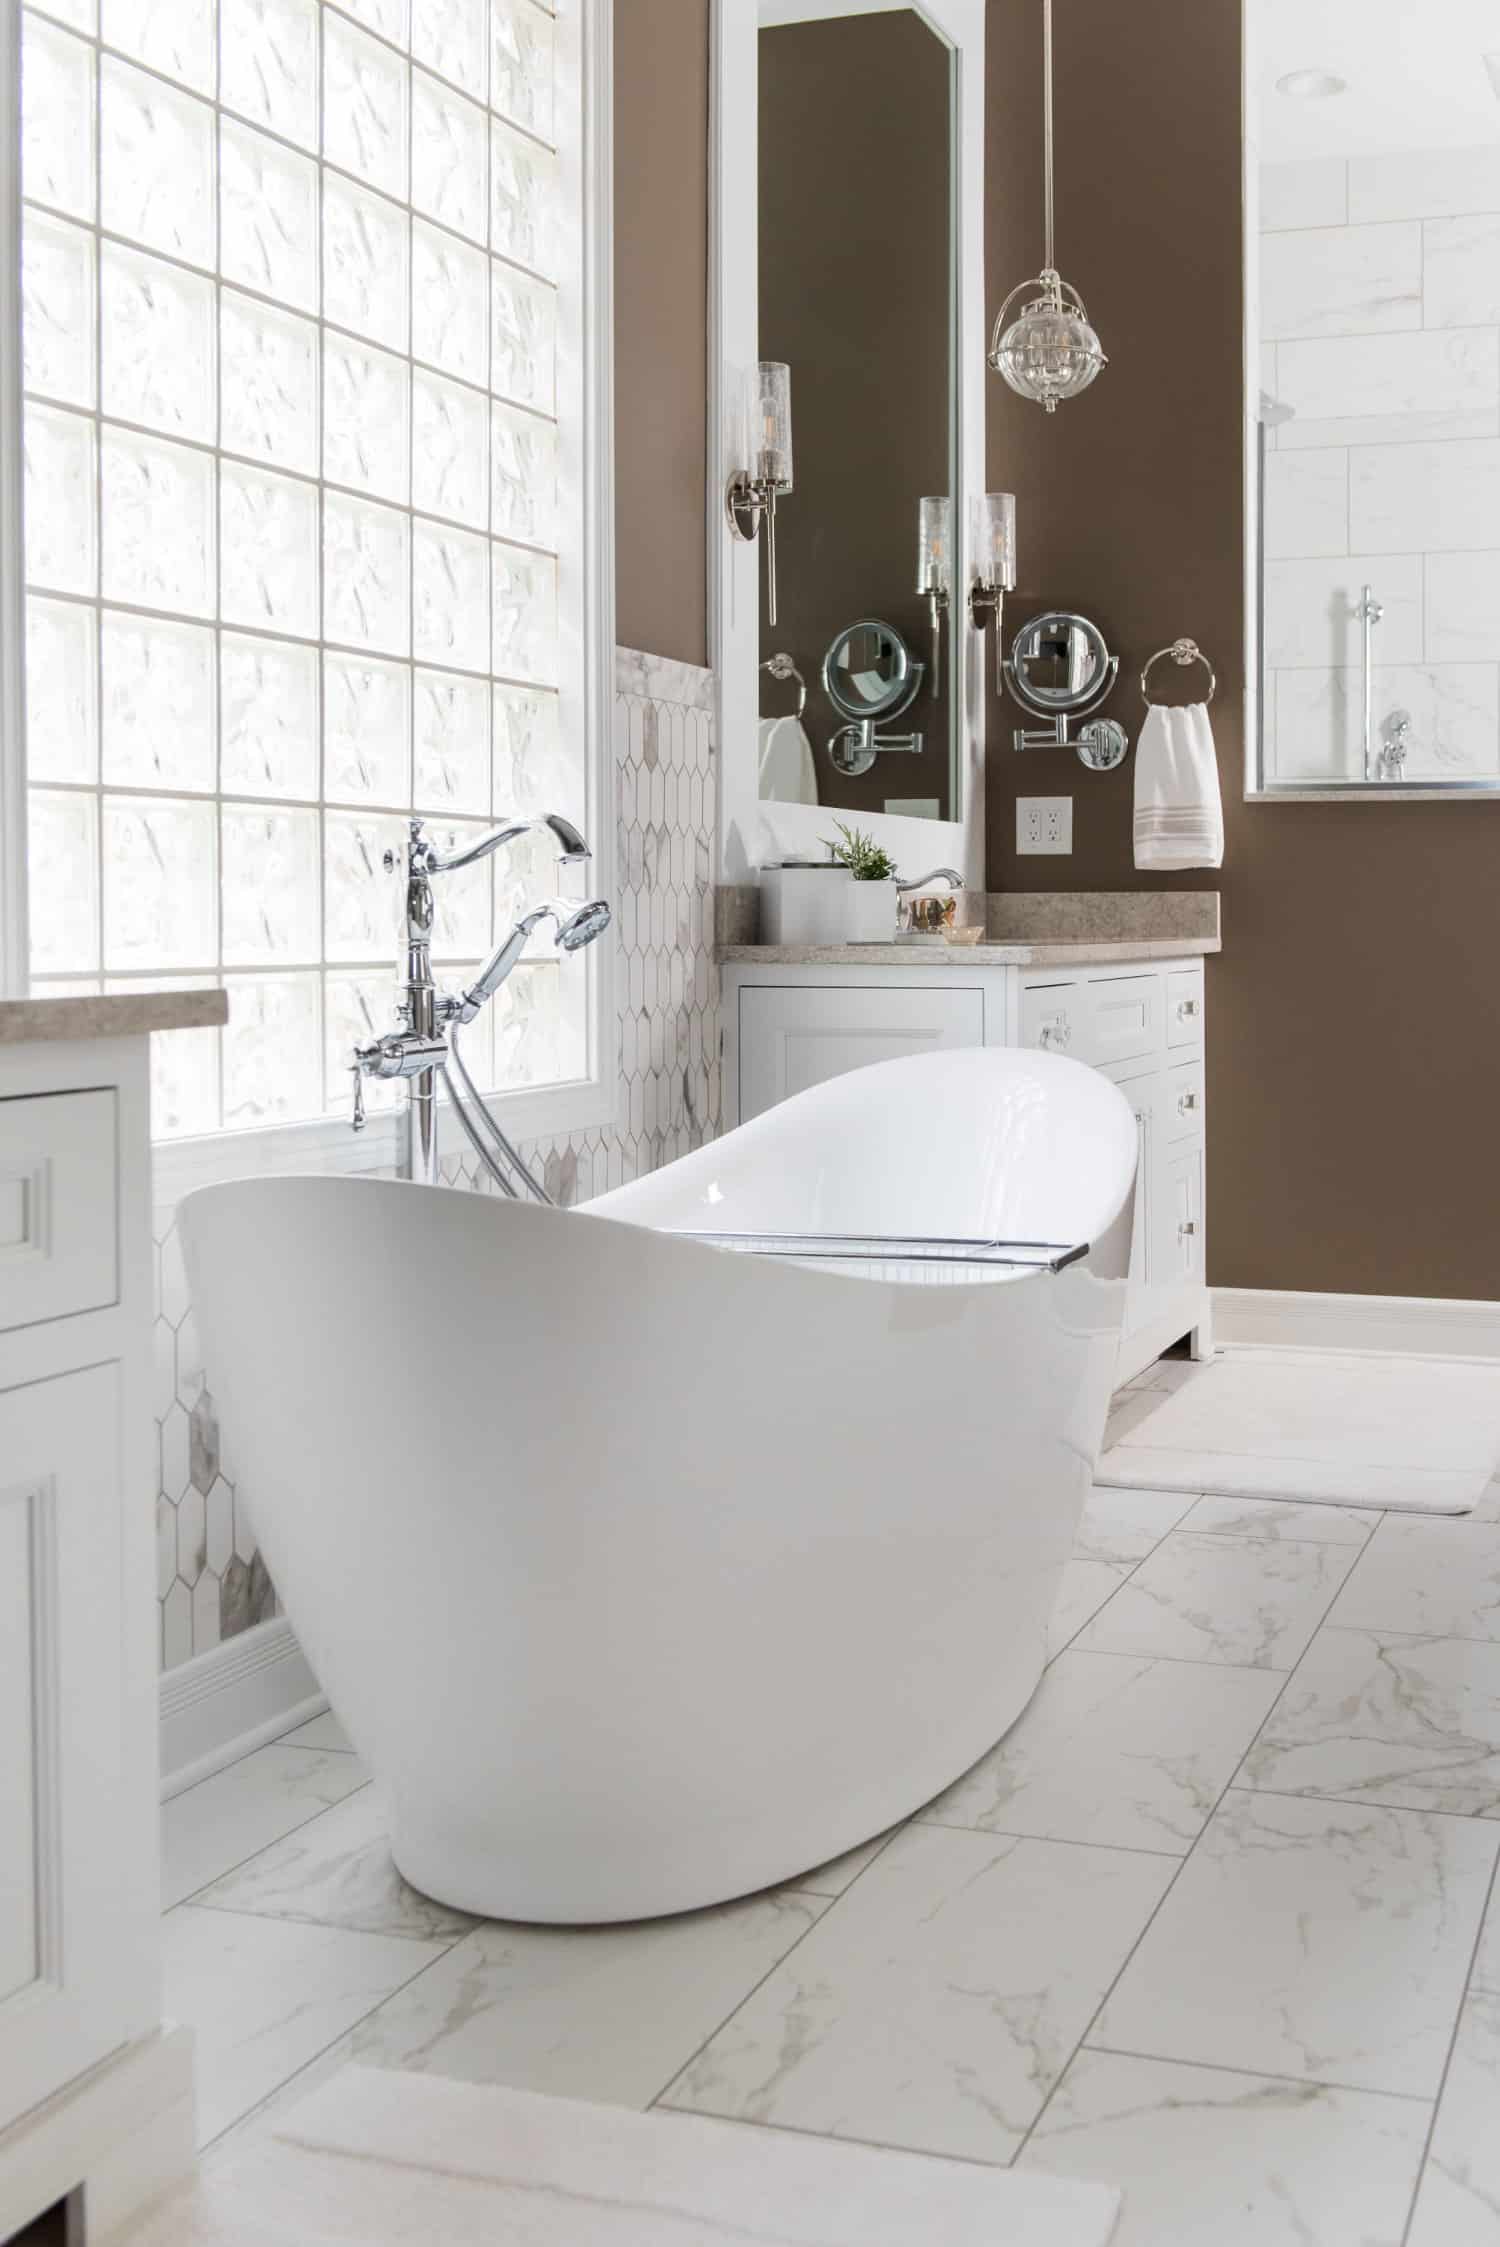 Nicholas Design Build | Transform your bathroom into a serene oasis with a white bathtub surrounded by warm brown walls.